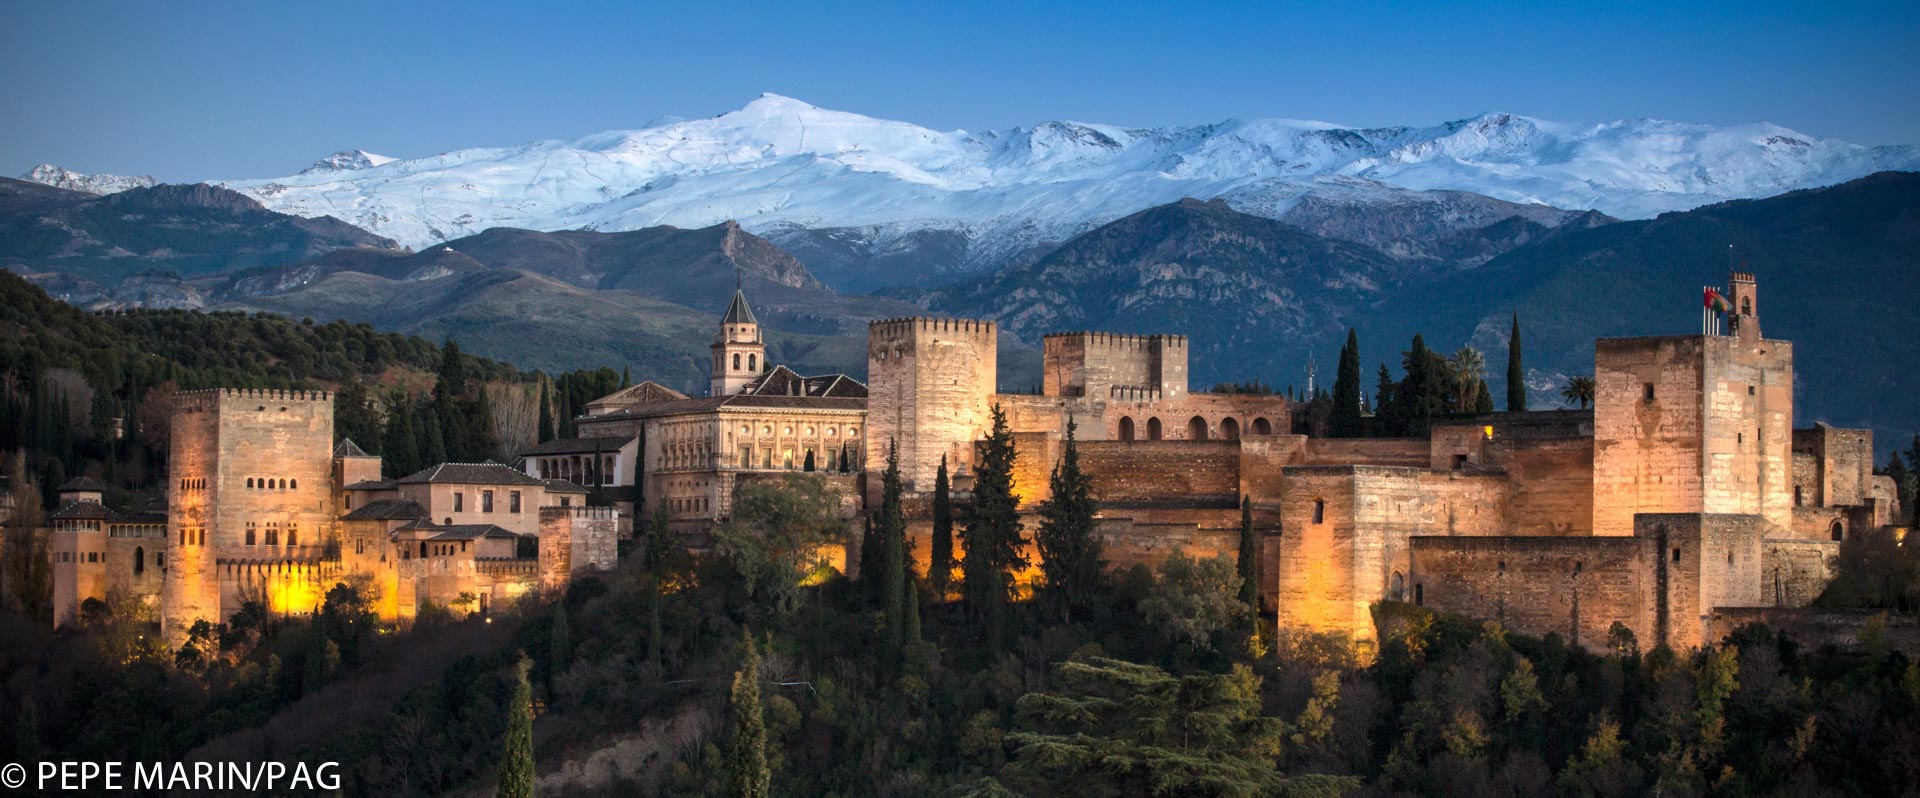 Alhambra and Generalife Gardens - European Route of Historic Gardens